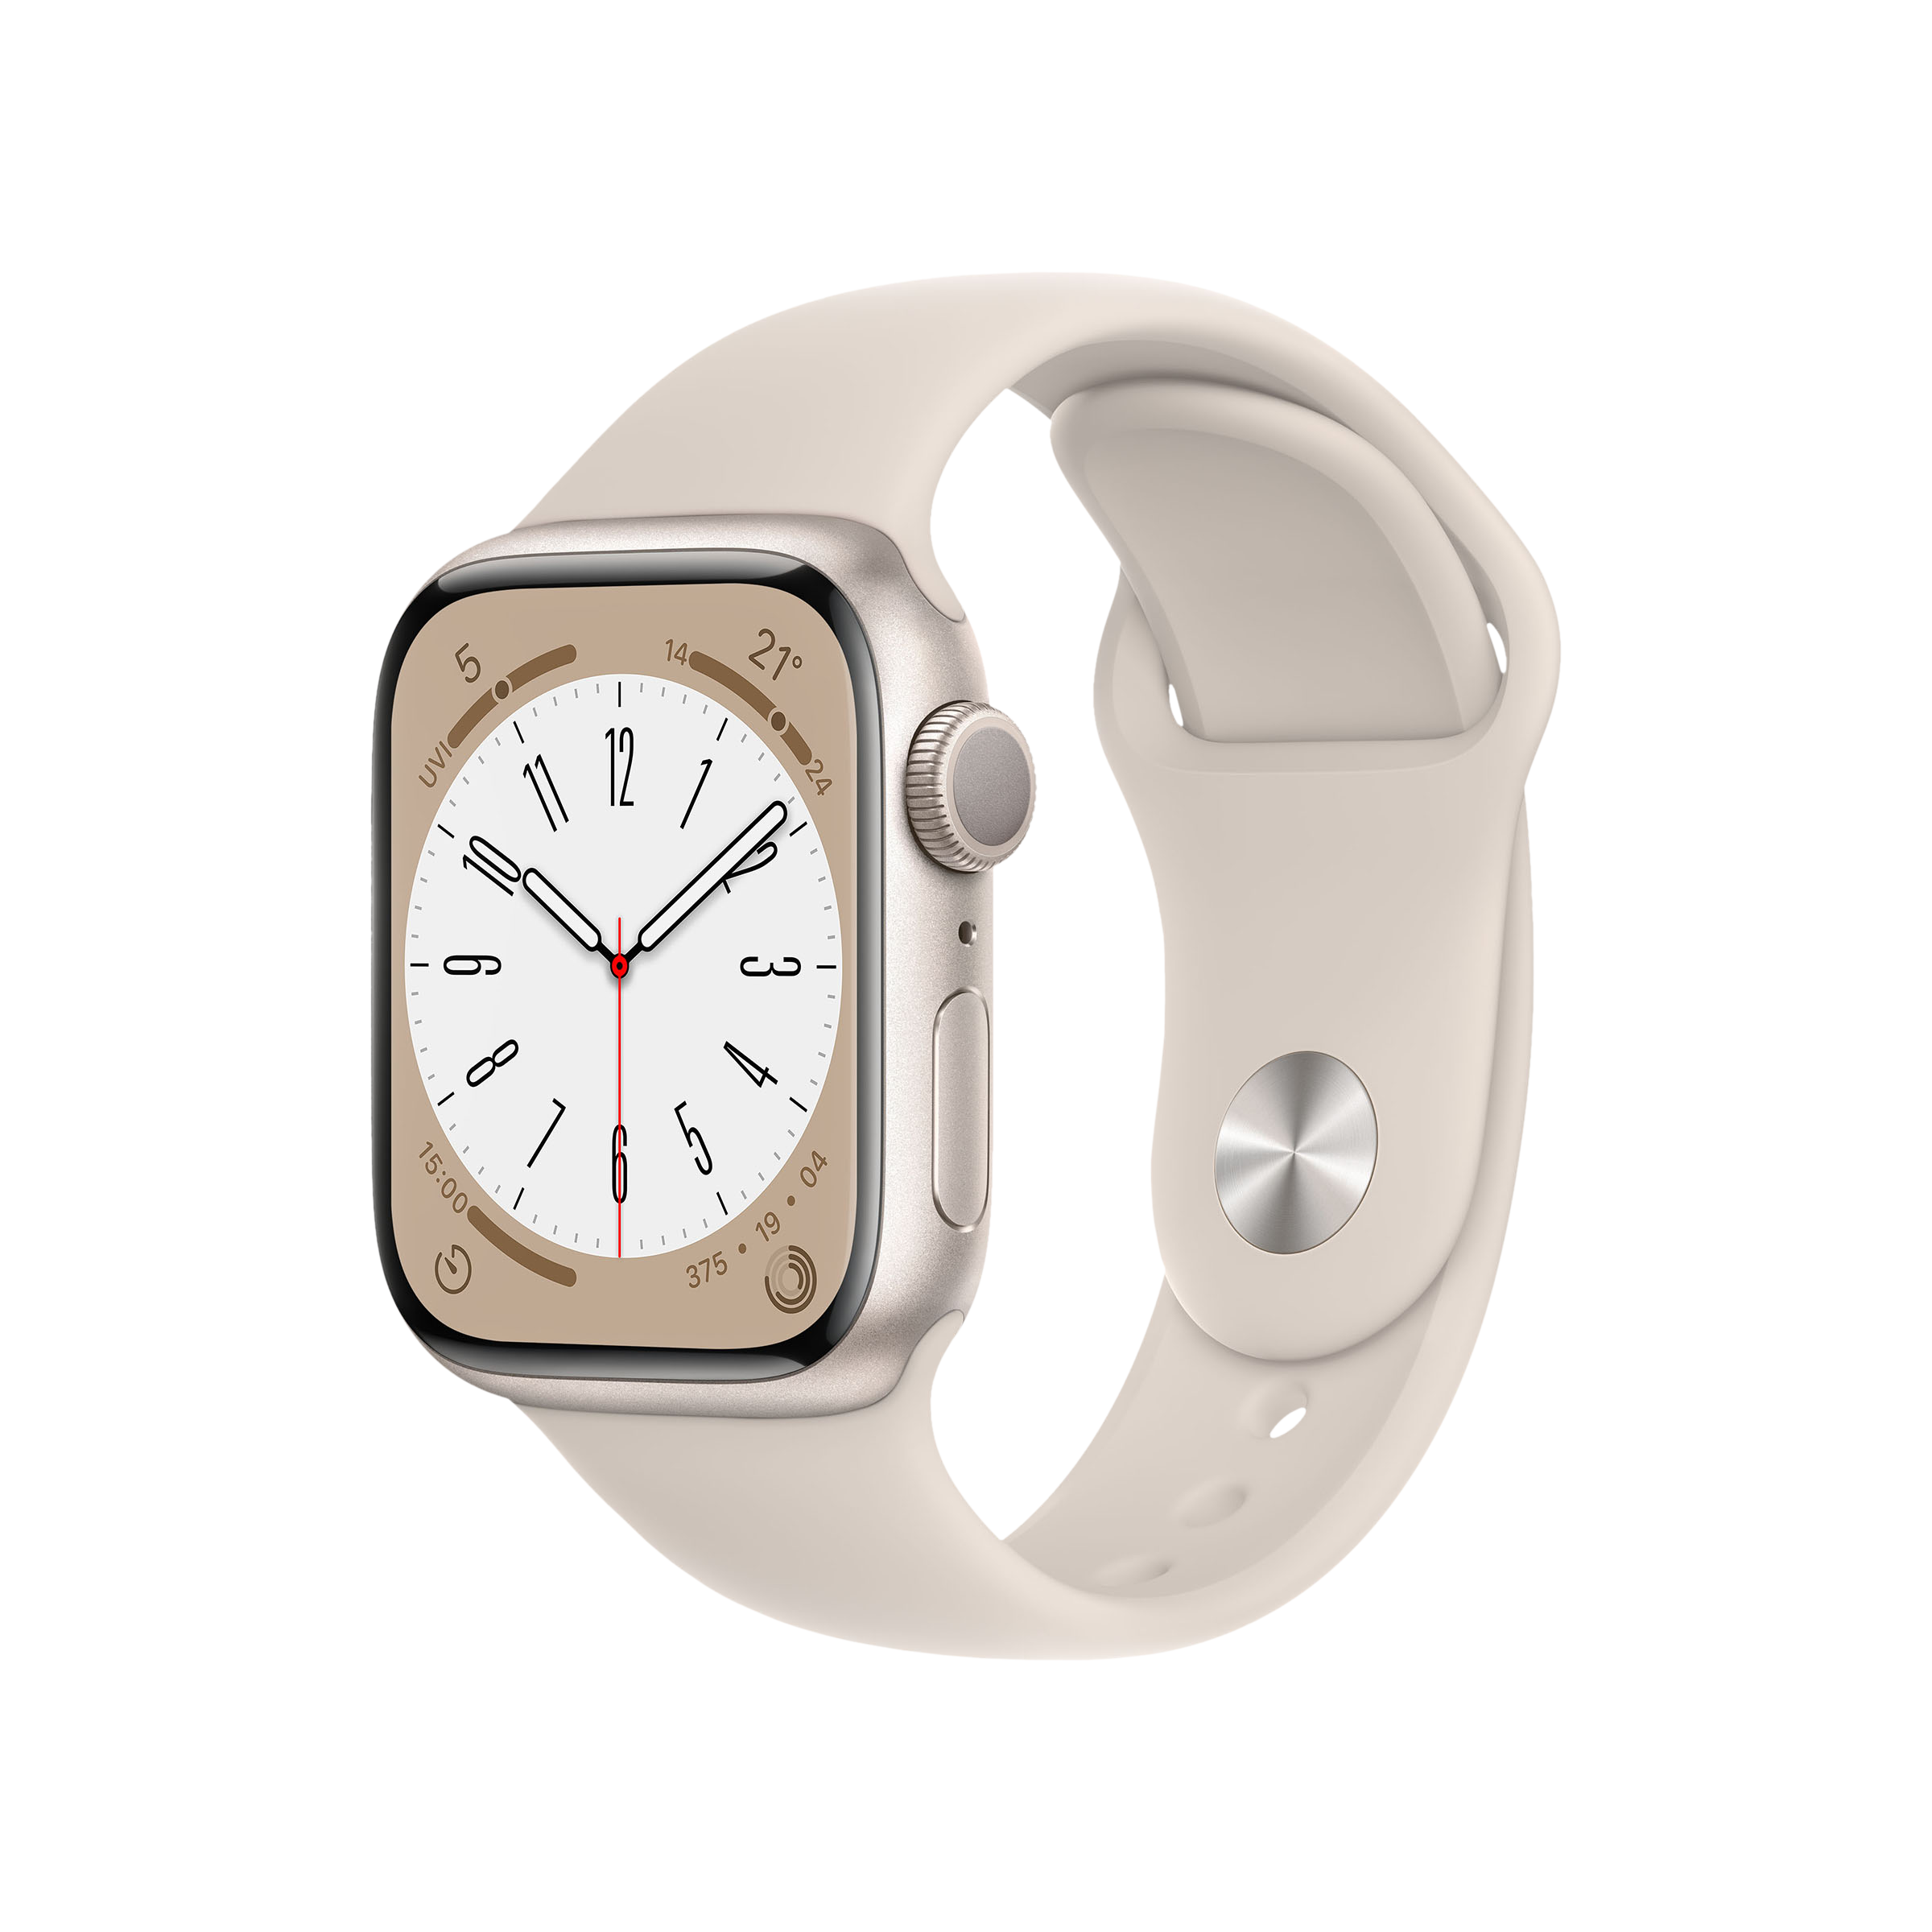 The Gold Apple Watch Edition, Which Started at $10,000, Will Not Work With  watchOS 5